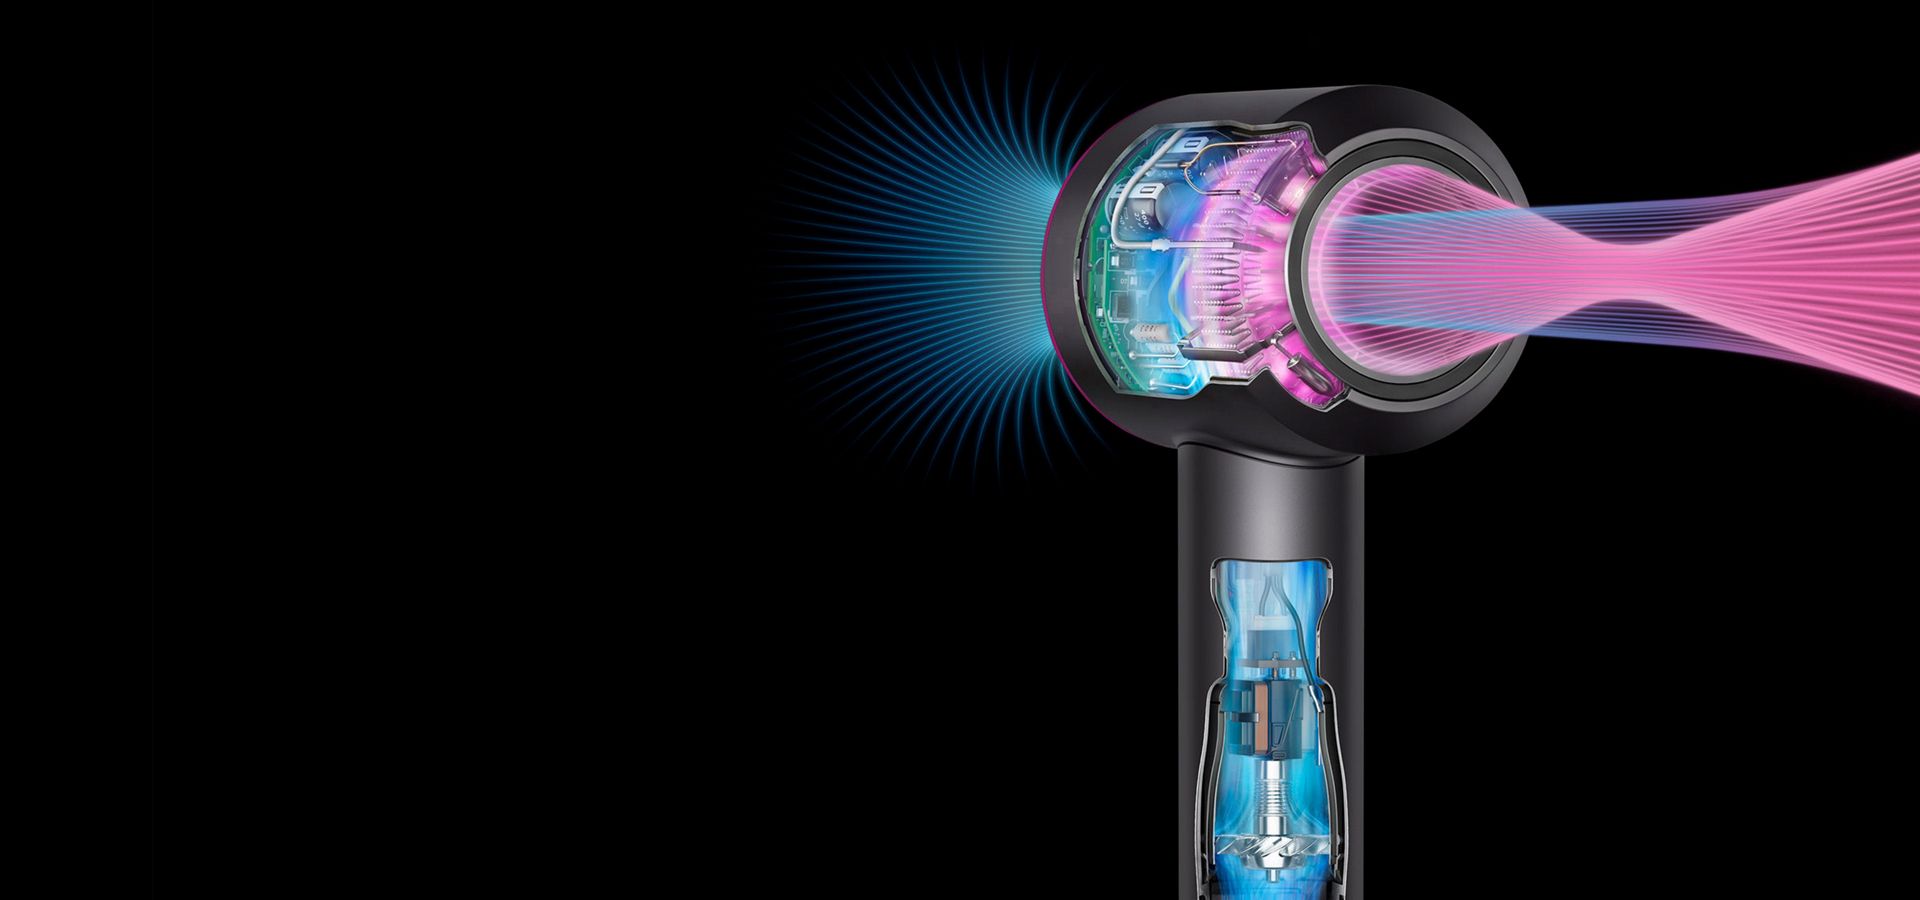 Cutaways of the Supersonic hair dryer to demonstrate powerful airflow and intelligent heat control.